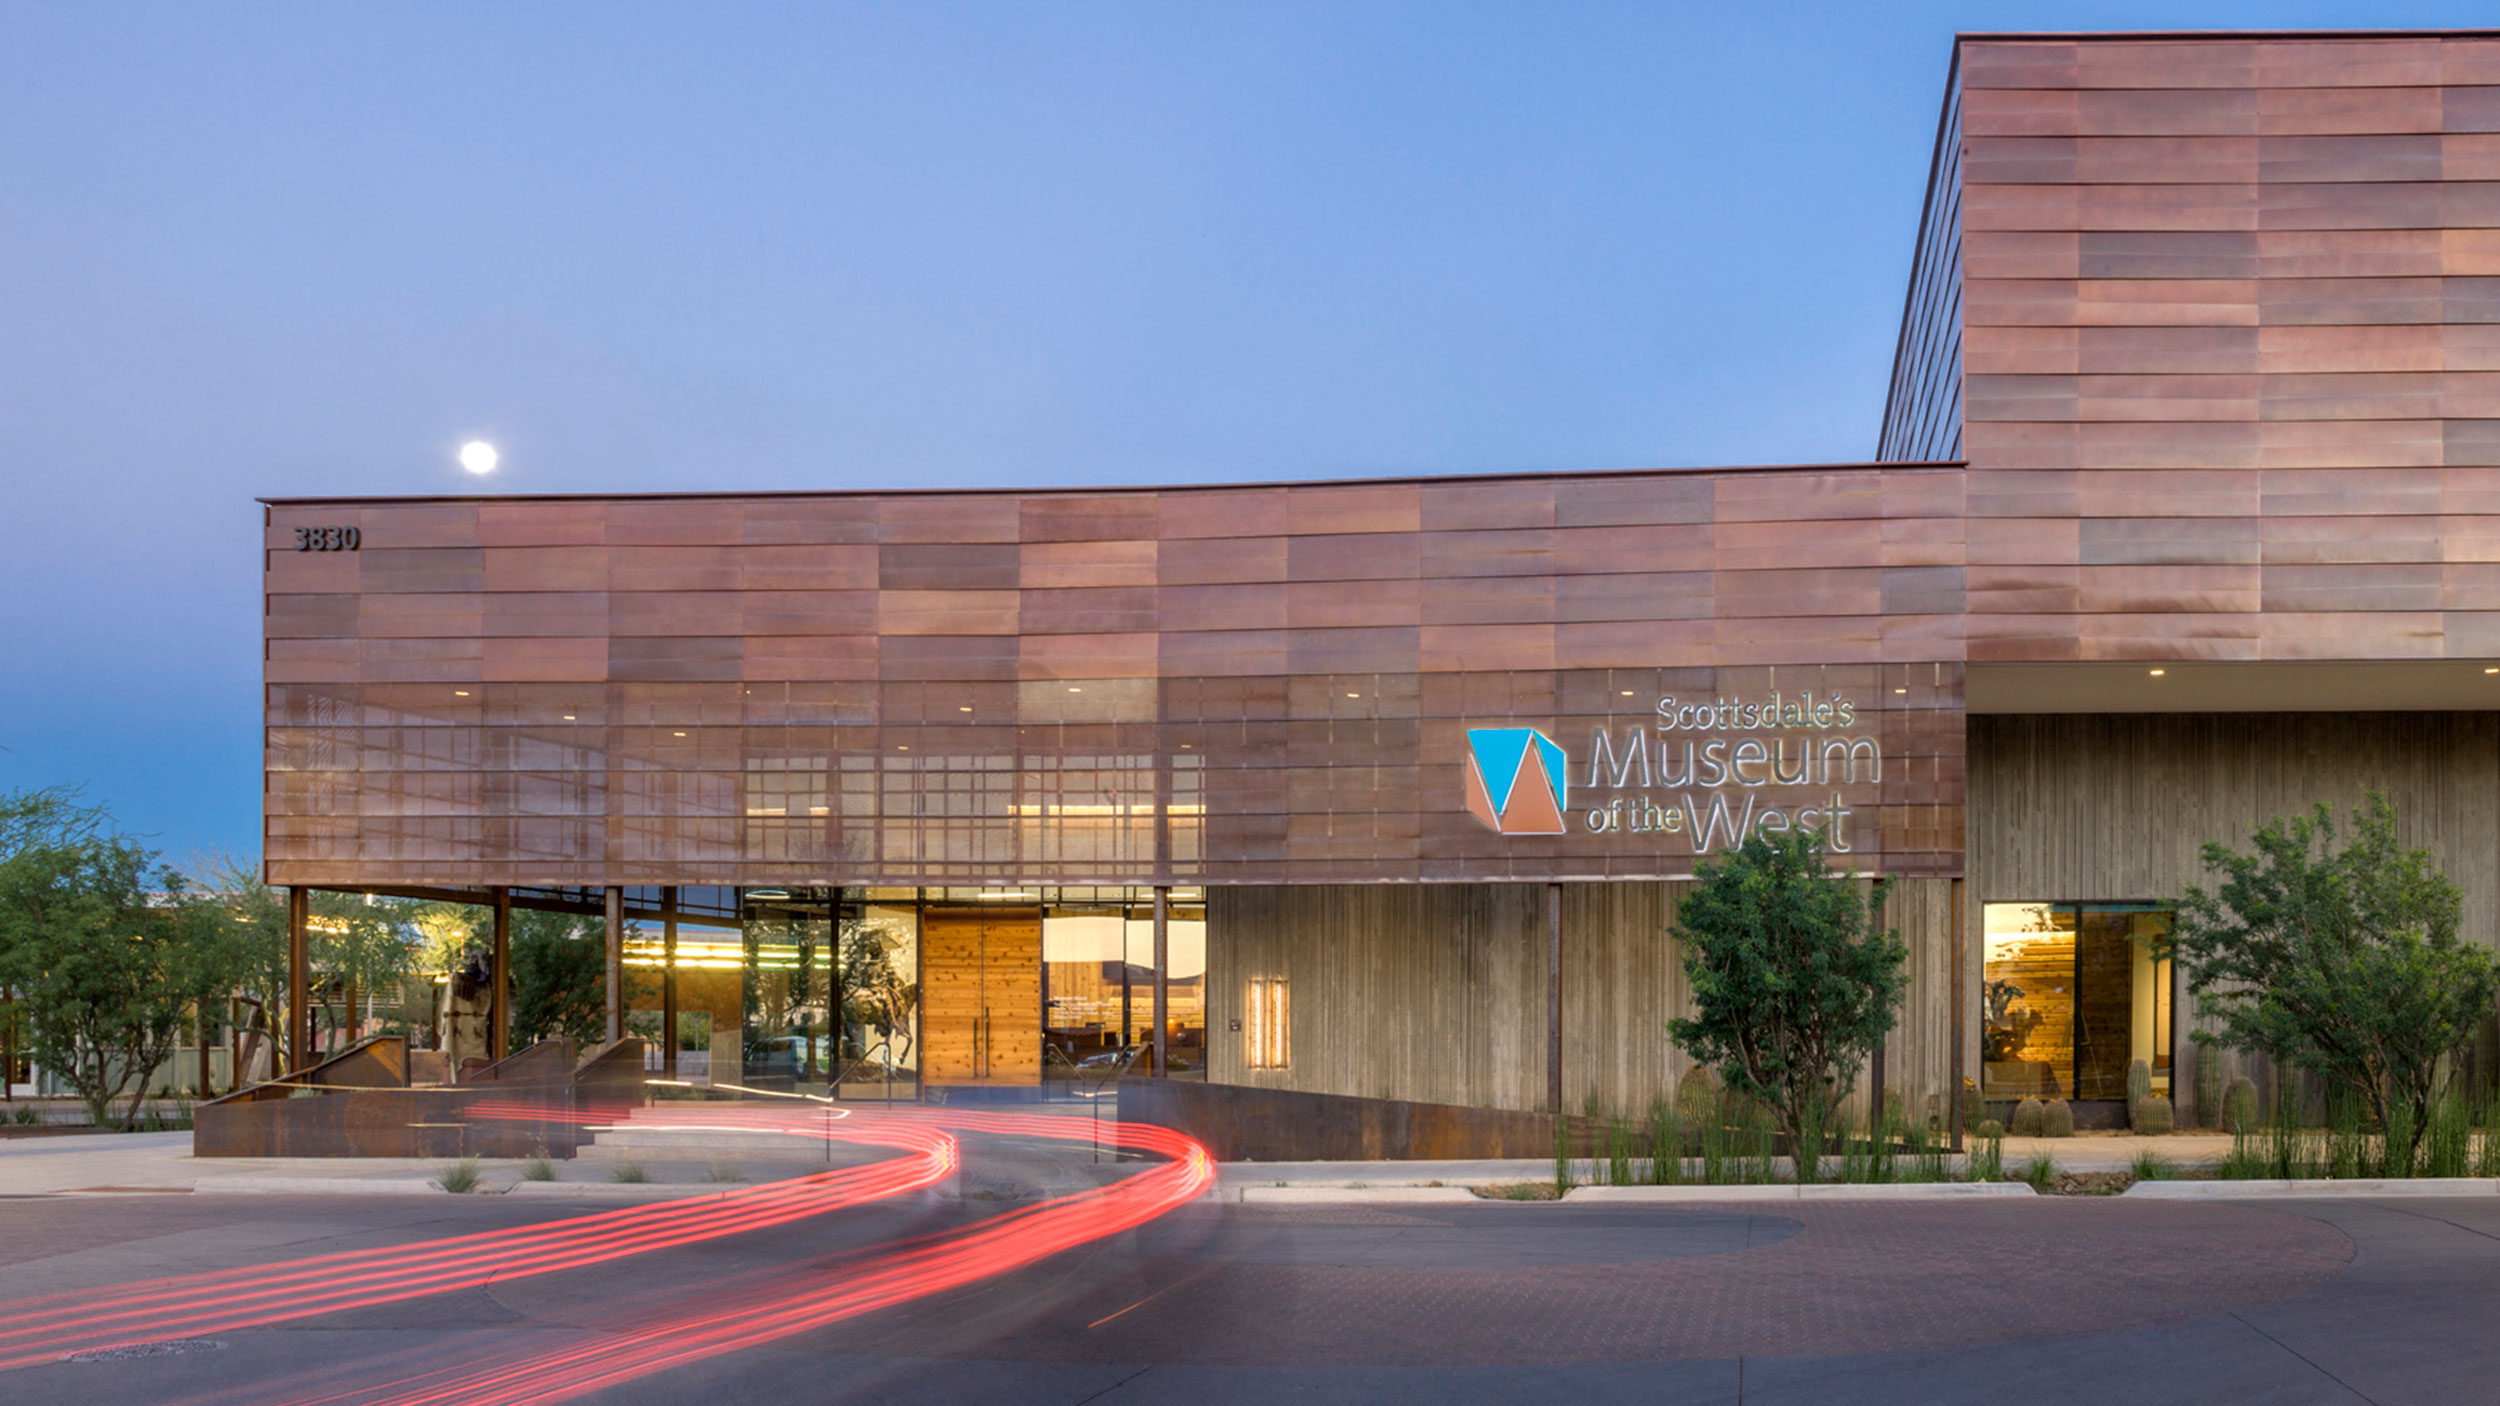 Ascent at the Phoenician® Launches Strategic Partnership with Scottsdale’s Museum of the West